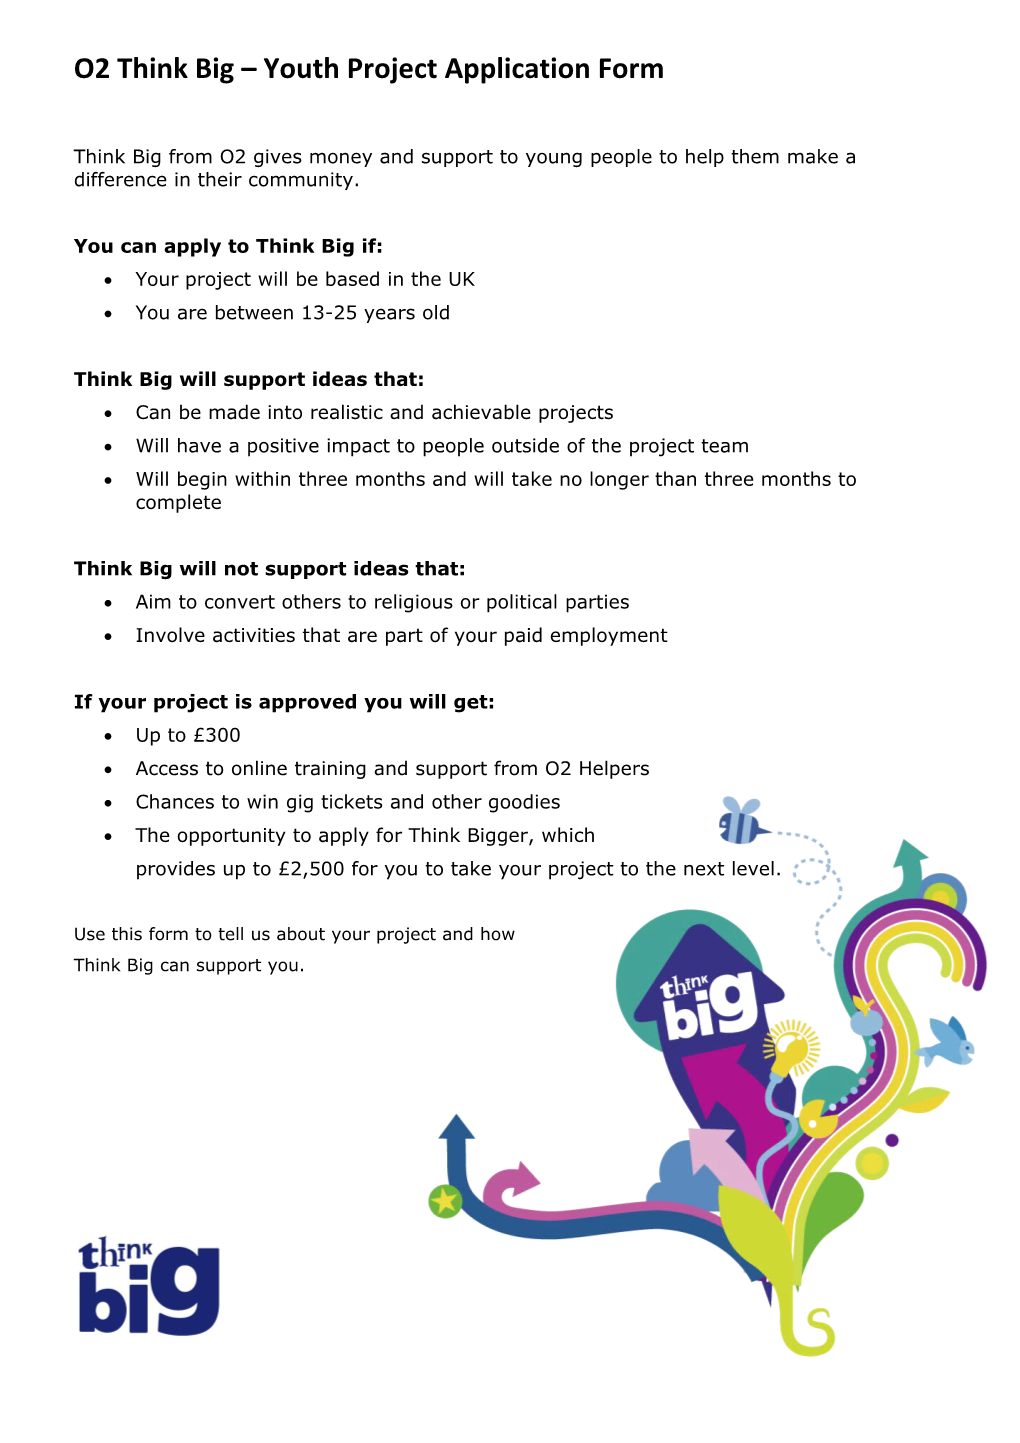 O2 Think Big Youth Project Application Form